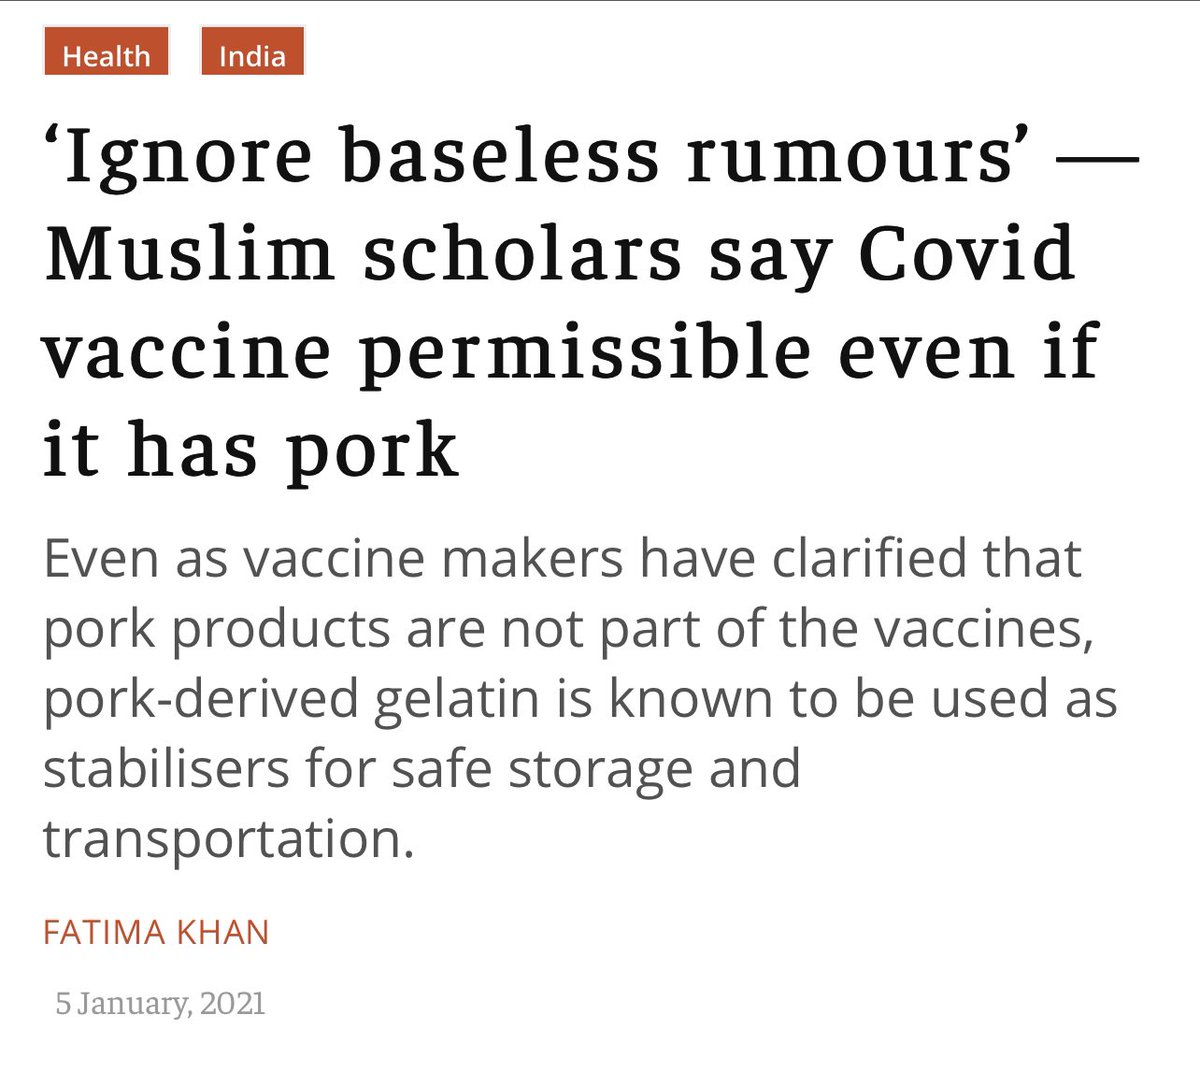 [12/n] Unknown Persons (Minorities)Then there was debate around Halal or Haram of the vaccine, it’s ingredients which must have sparked the  #VaccineHesitancy leading to more  #VaccineNaysayers